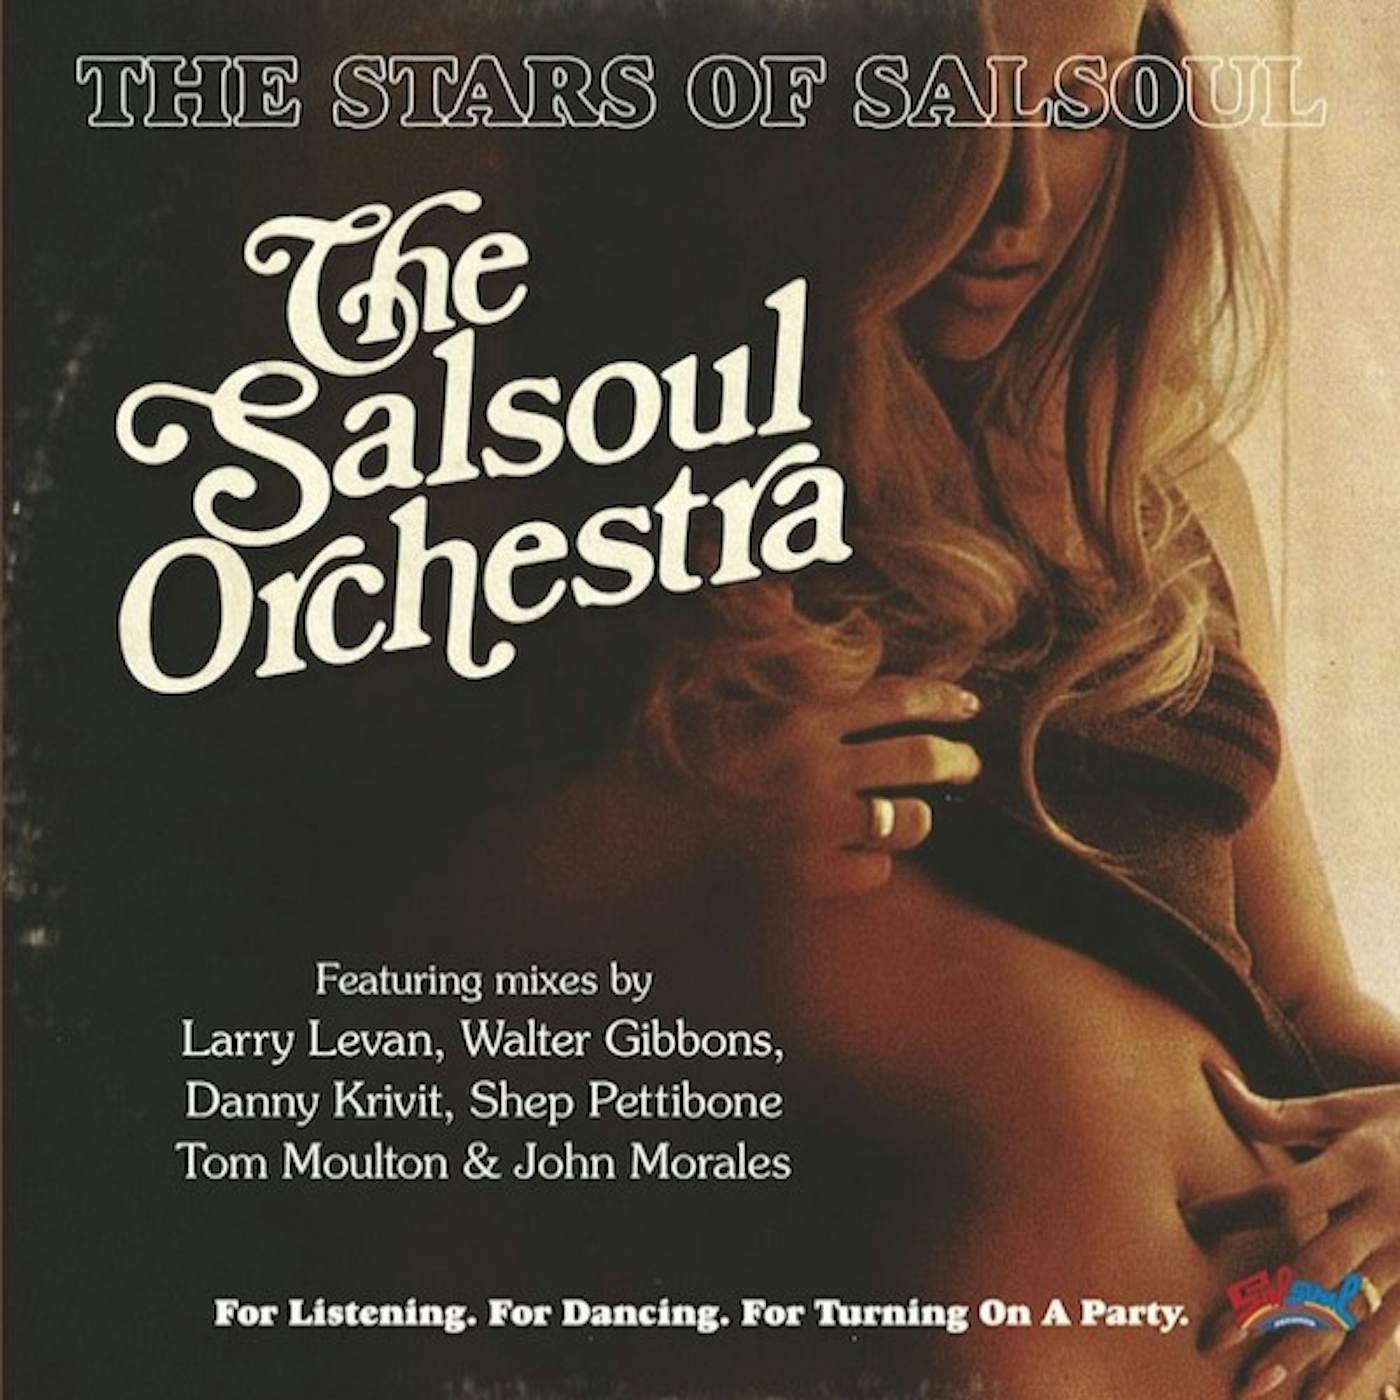 The Salsoul Orchestra STARS OF SALSOUL Vinyl Record